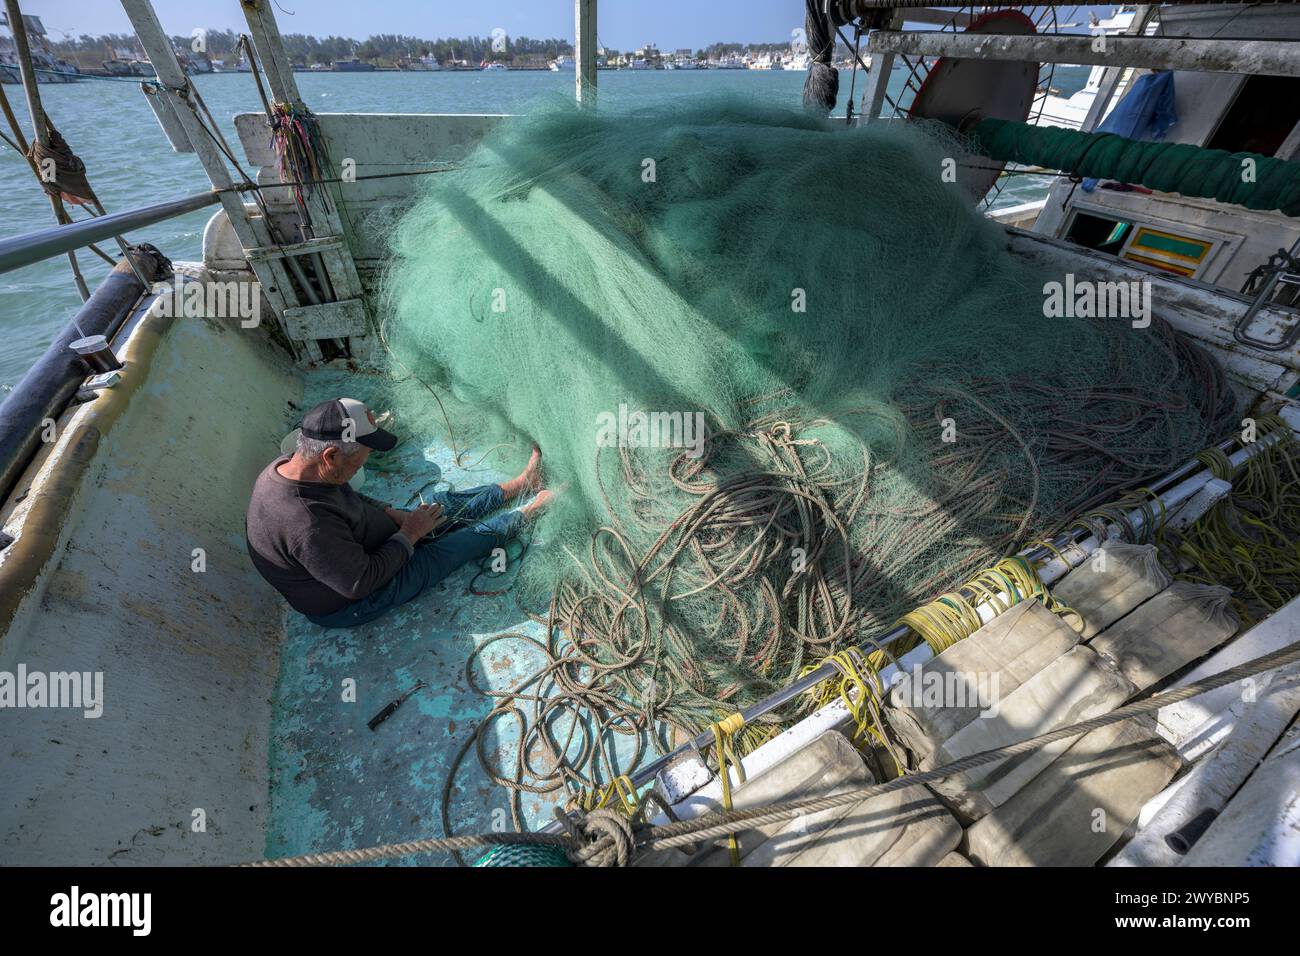 A fisherman diligently repairs fishing nets on a boat deck, showcasing the daily life of maritime work Stock Photo